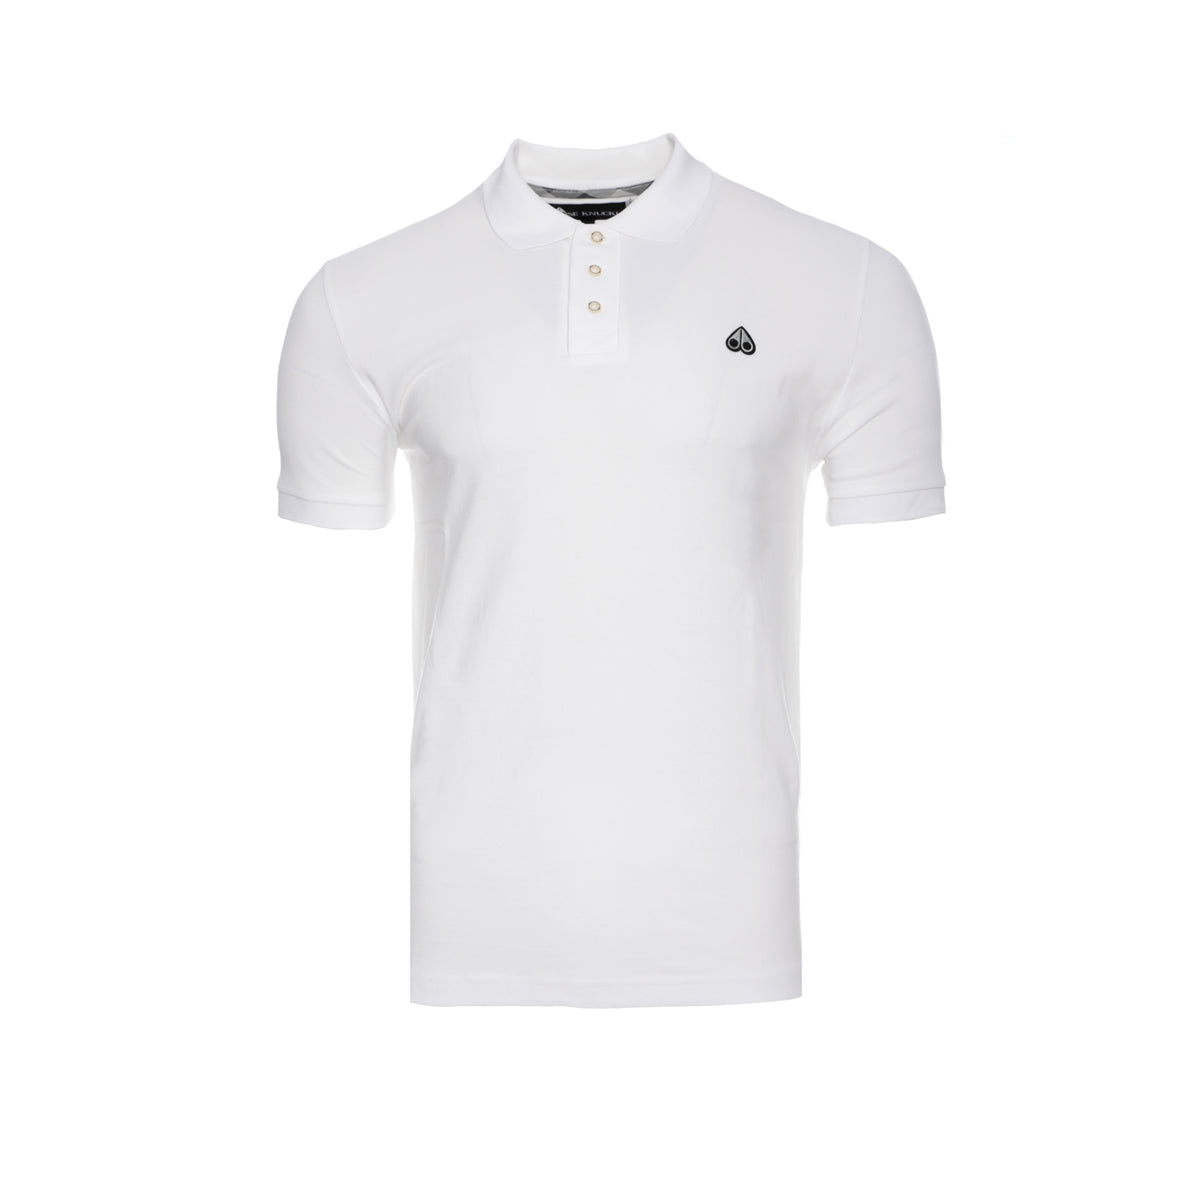 Moose Knuckles Men's Classic Polo Shirt White 